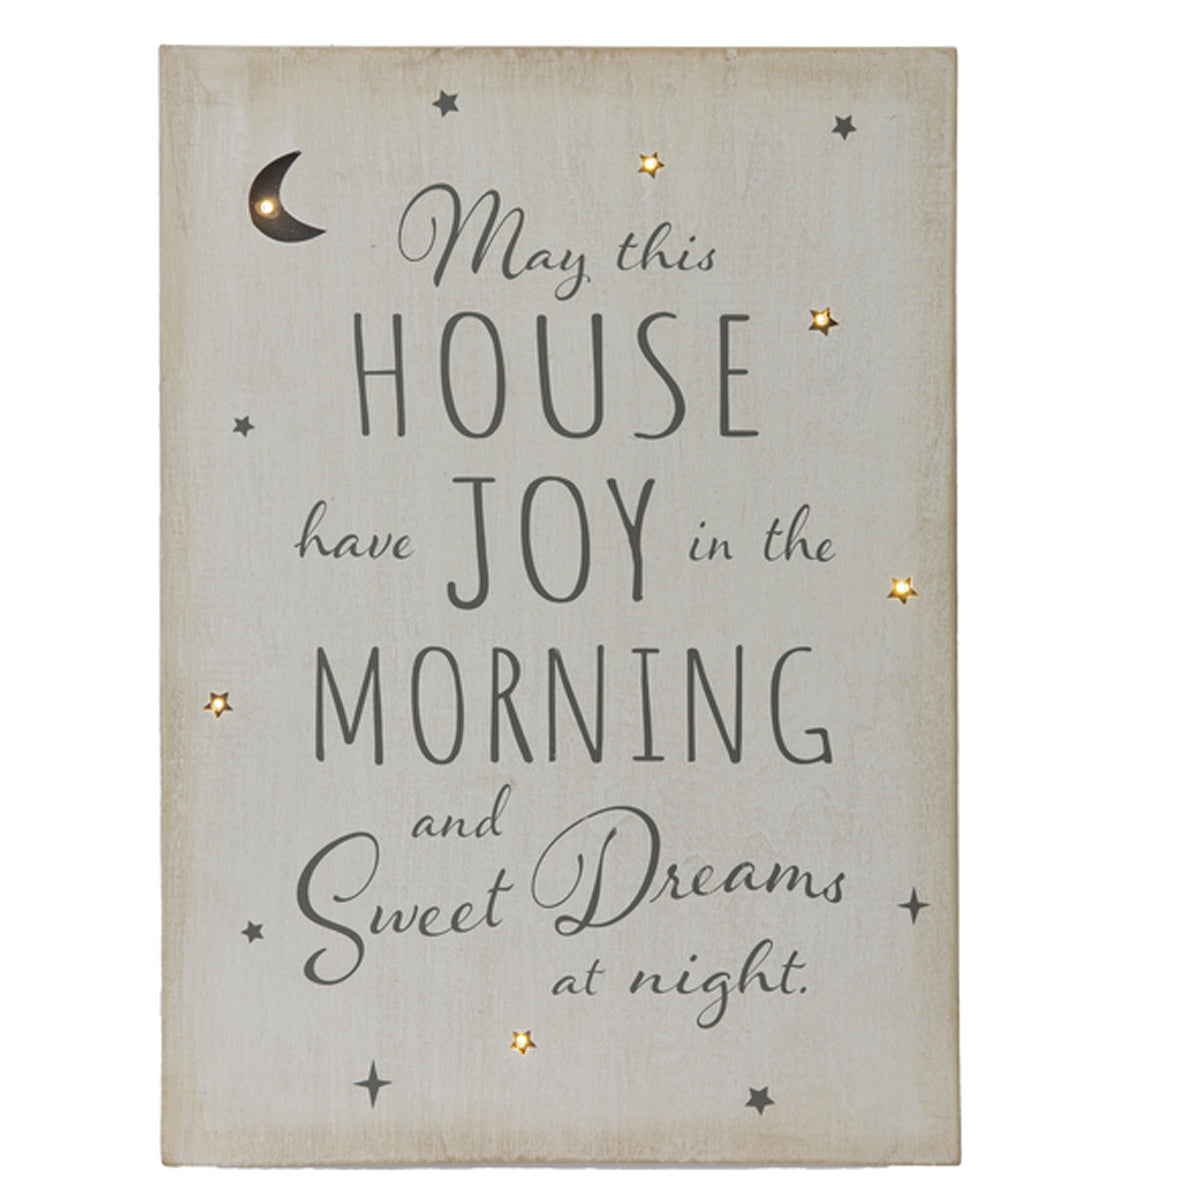 "May this house have joy" Light Up Wall Box Plaque